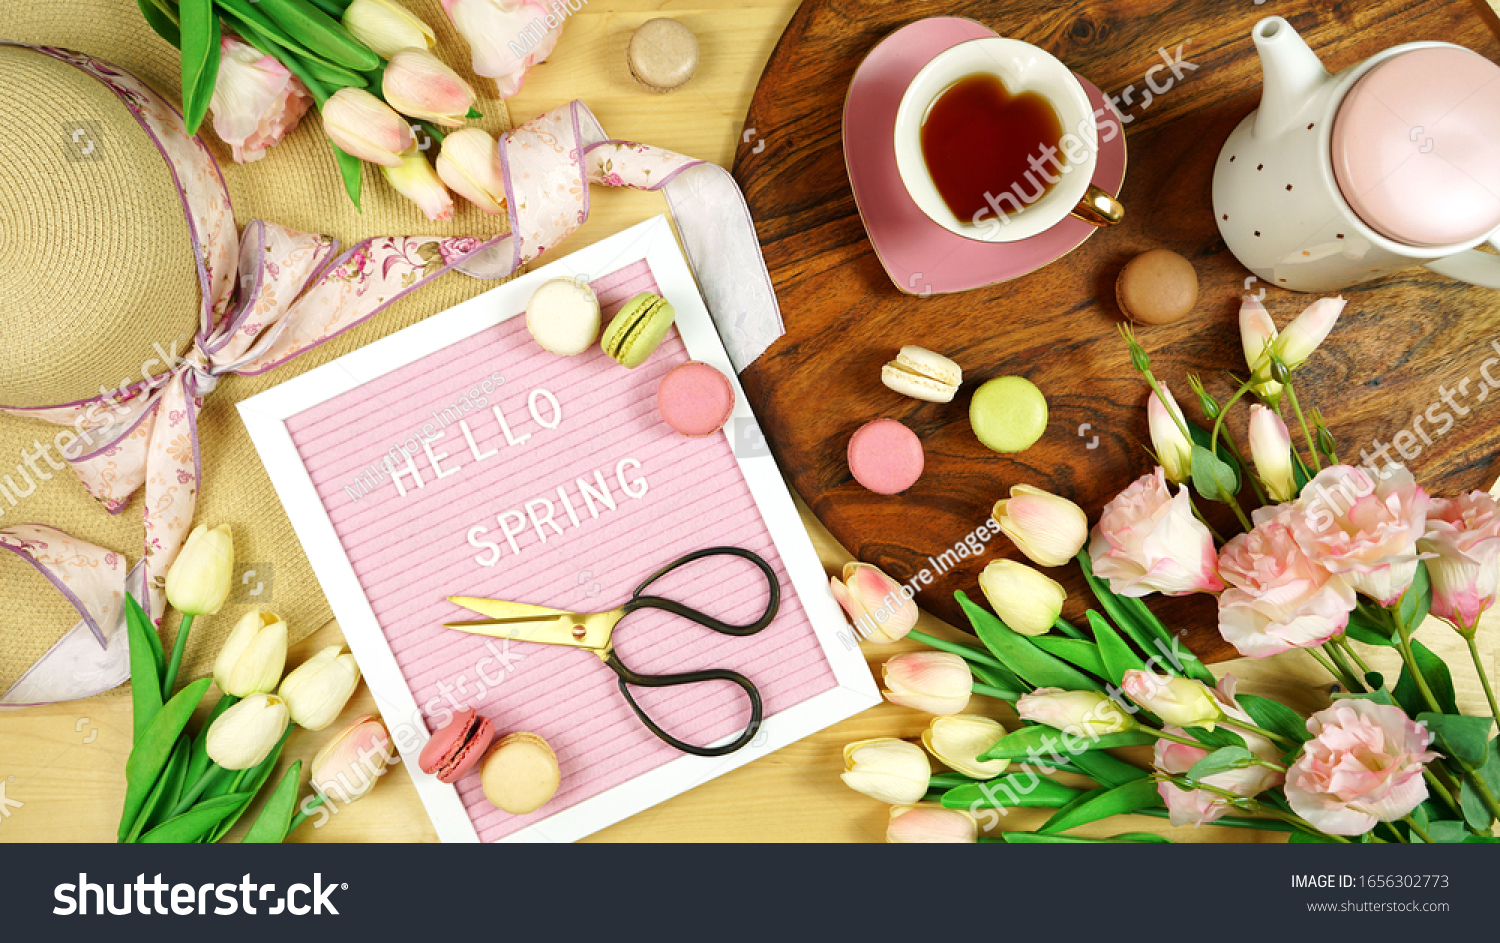 Hello Spring theme creative layout concept flat lay tea break with pink tulips and lisianthus flowers, sun hat on wooden table background, wih felt letter board. #1656302773